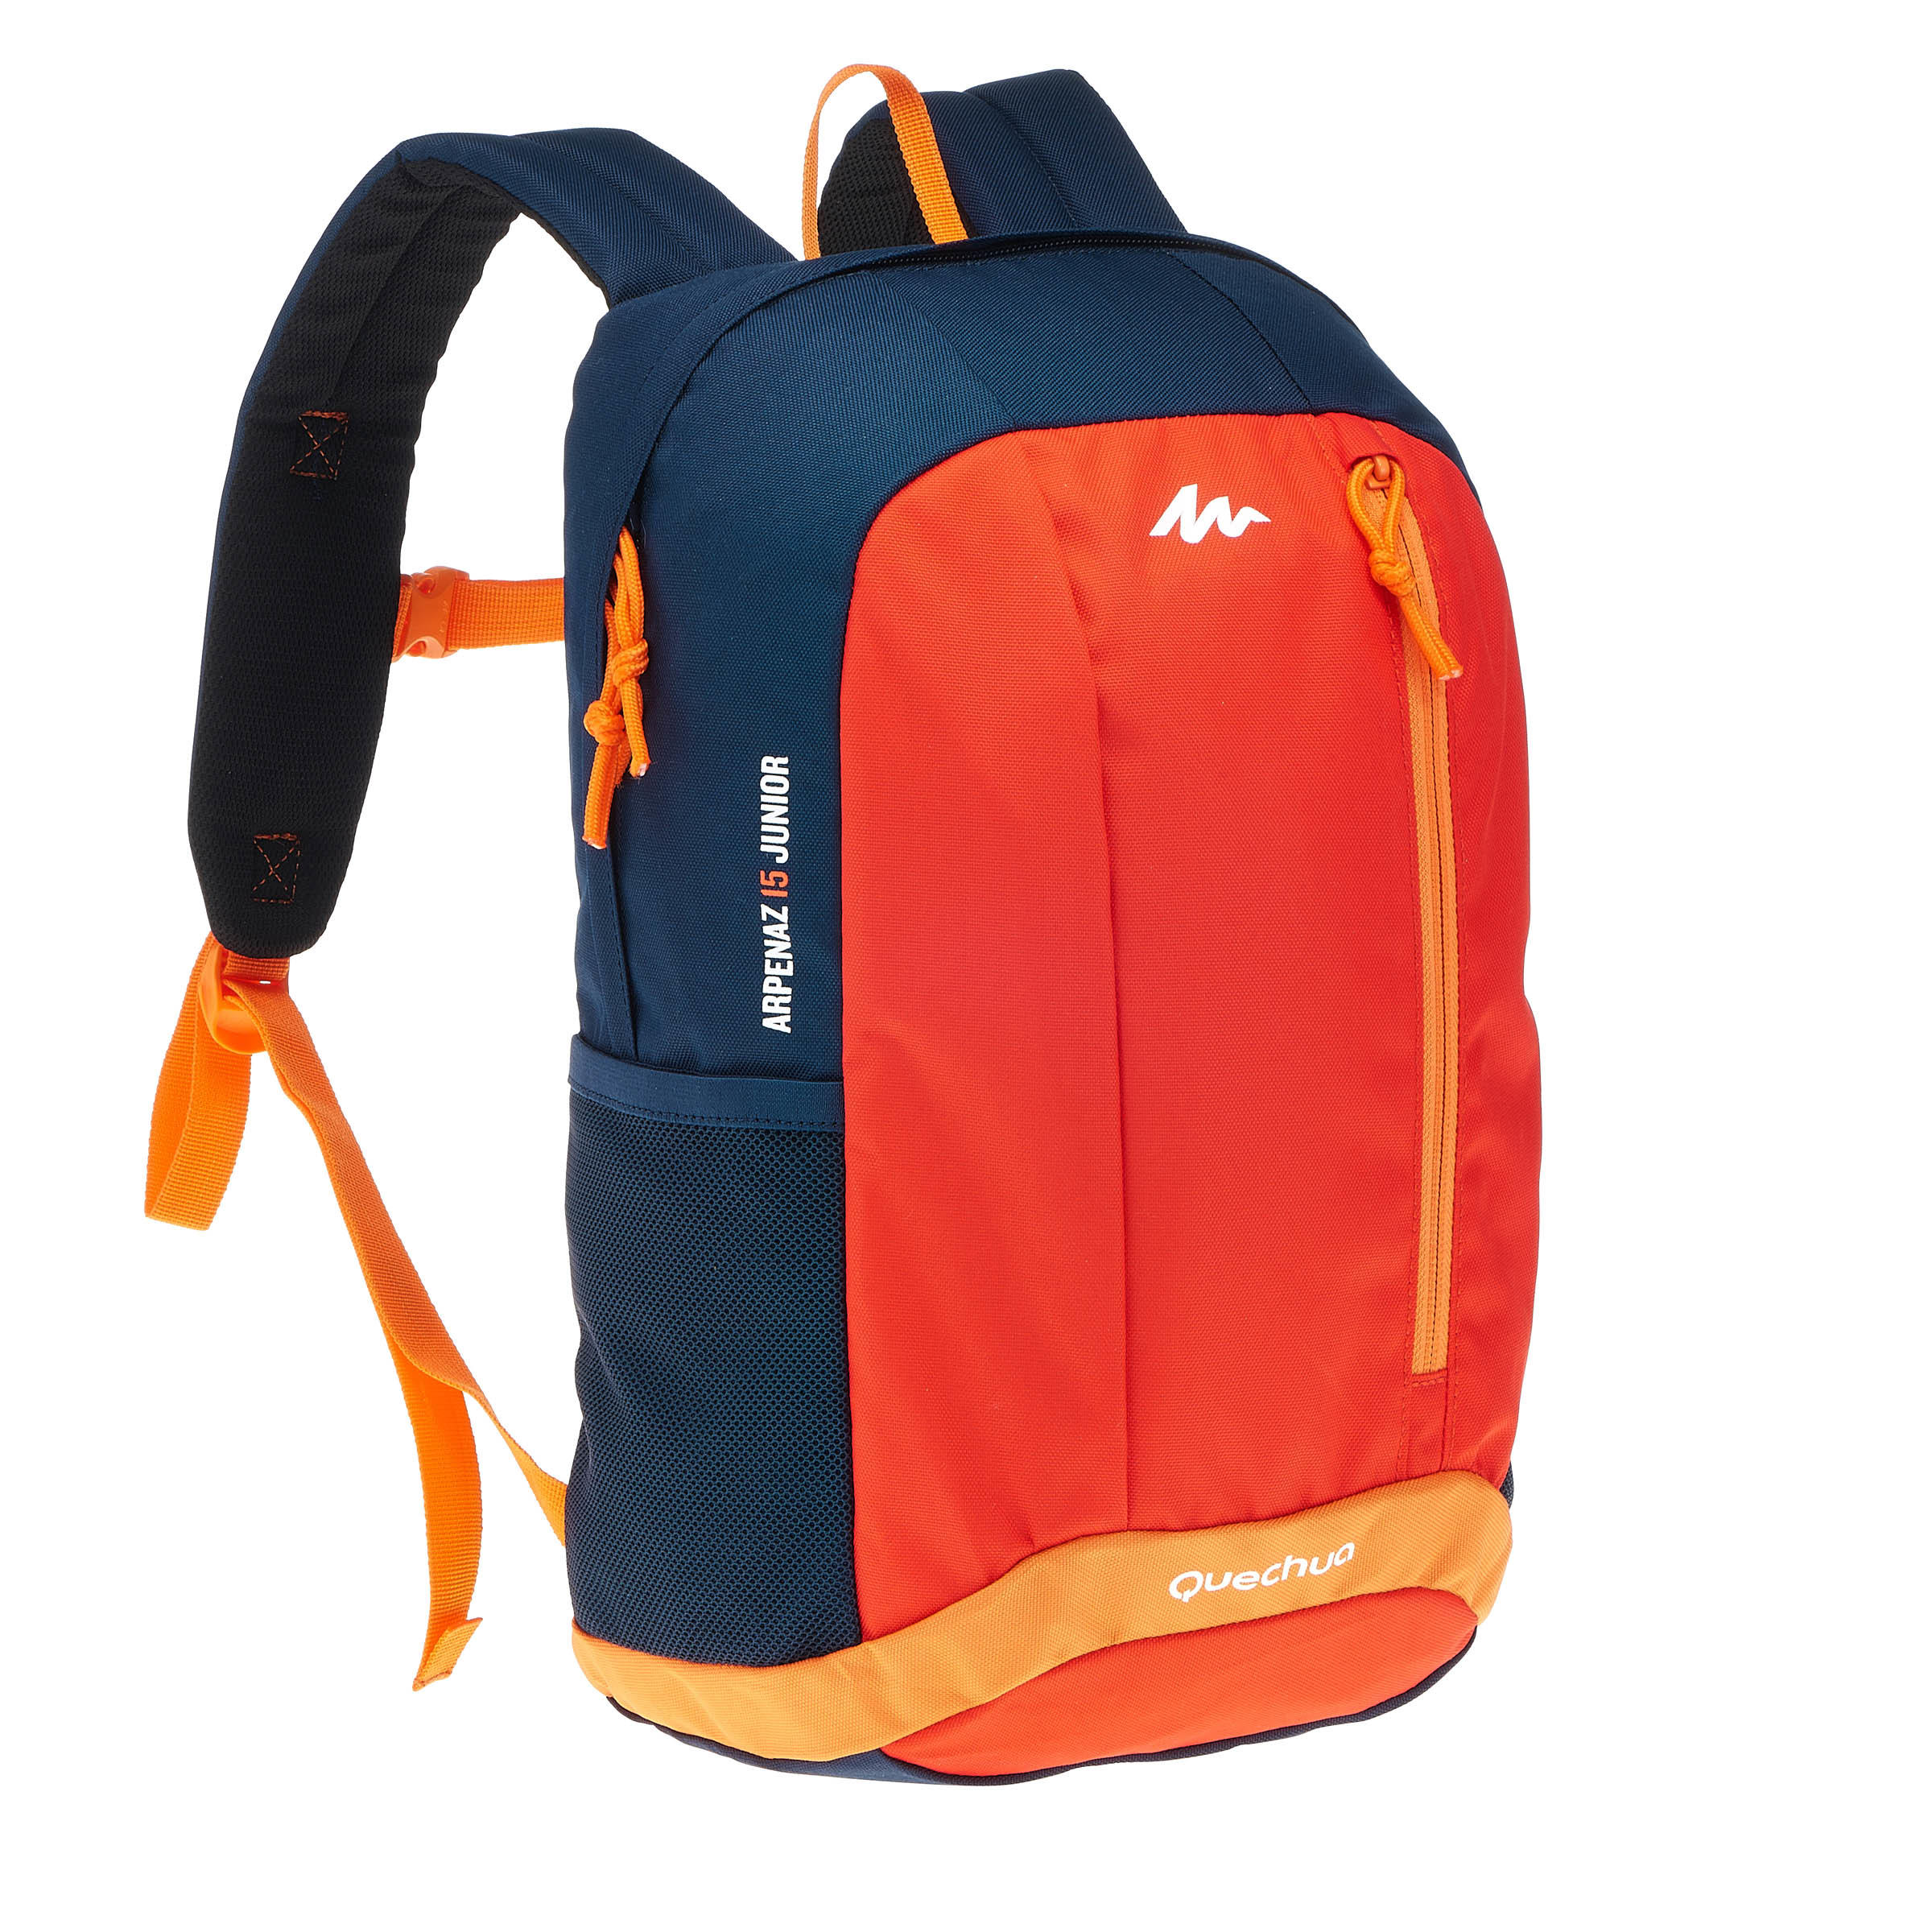 QUECHUA Kids Hiking Backpack MH500 15 Litres - Red